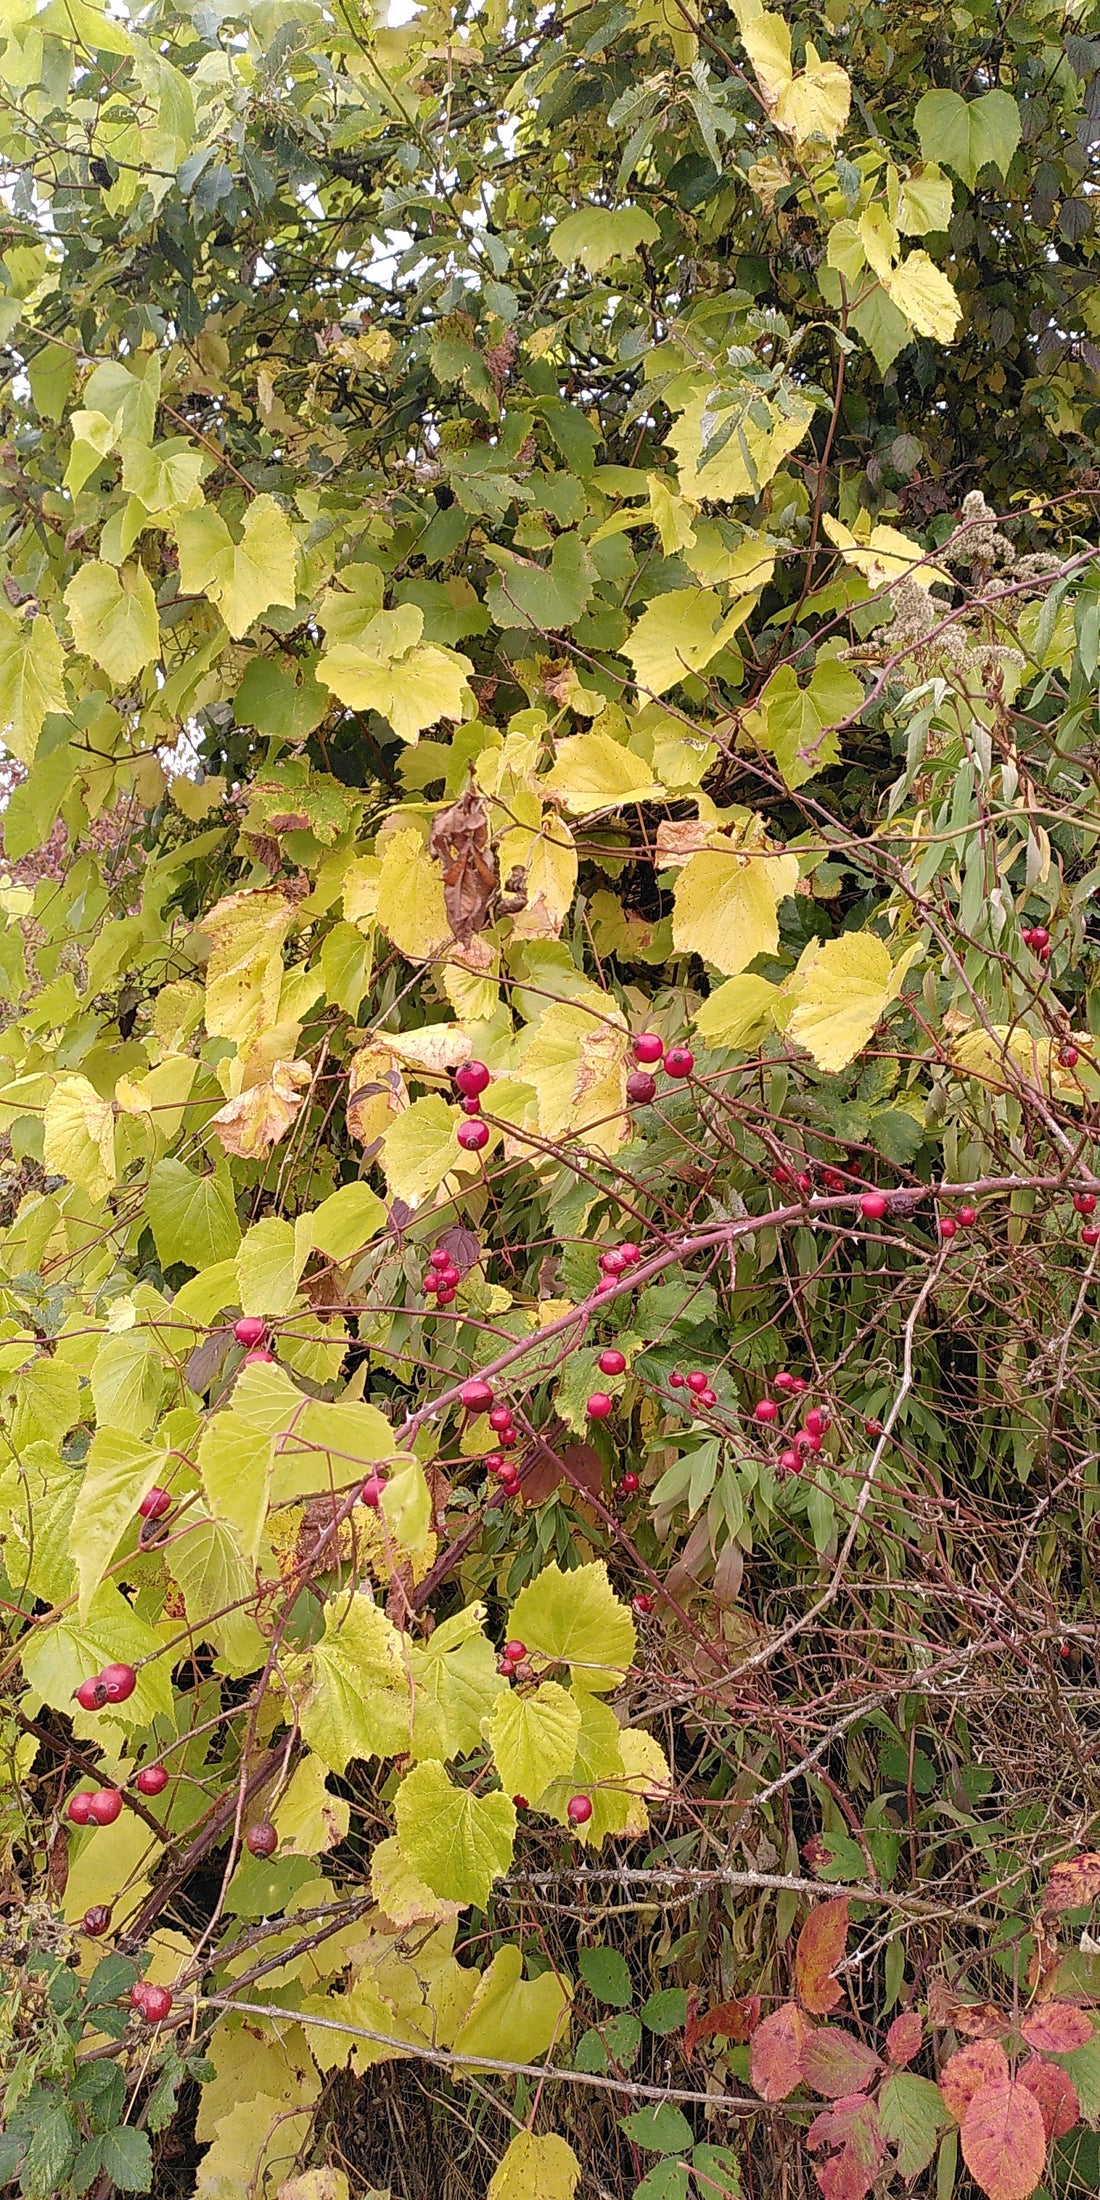 rosehips in grapes in an apple tree